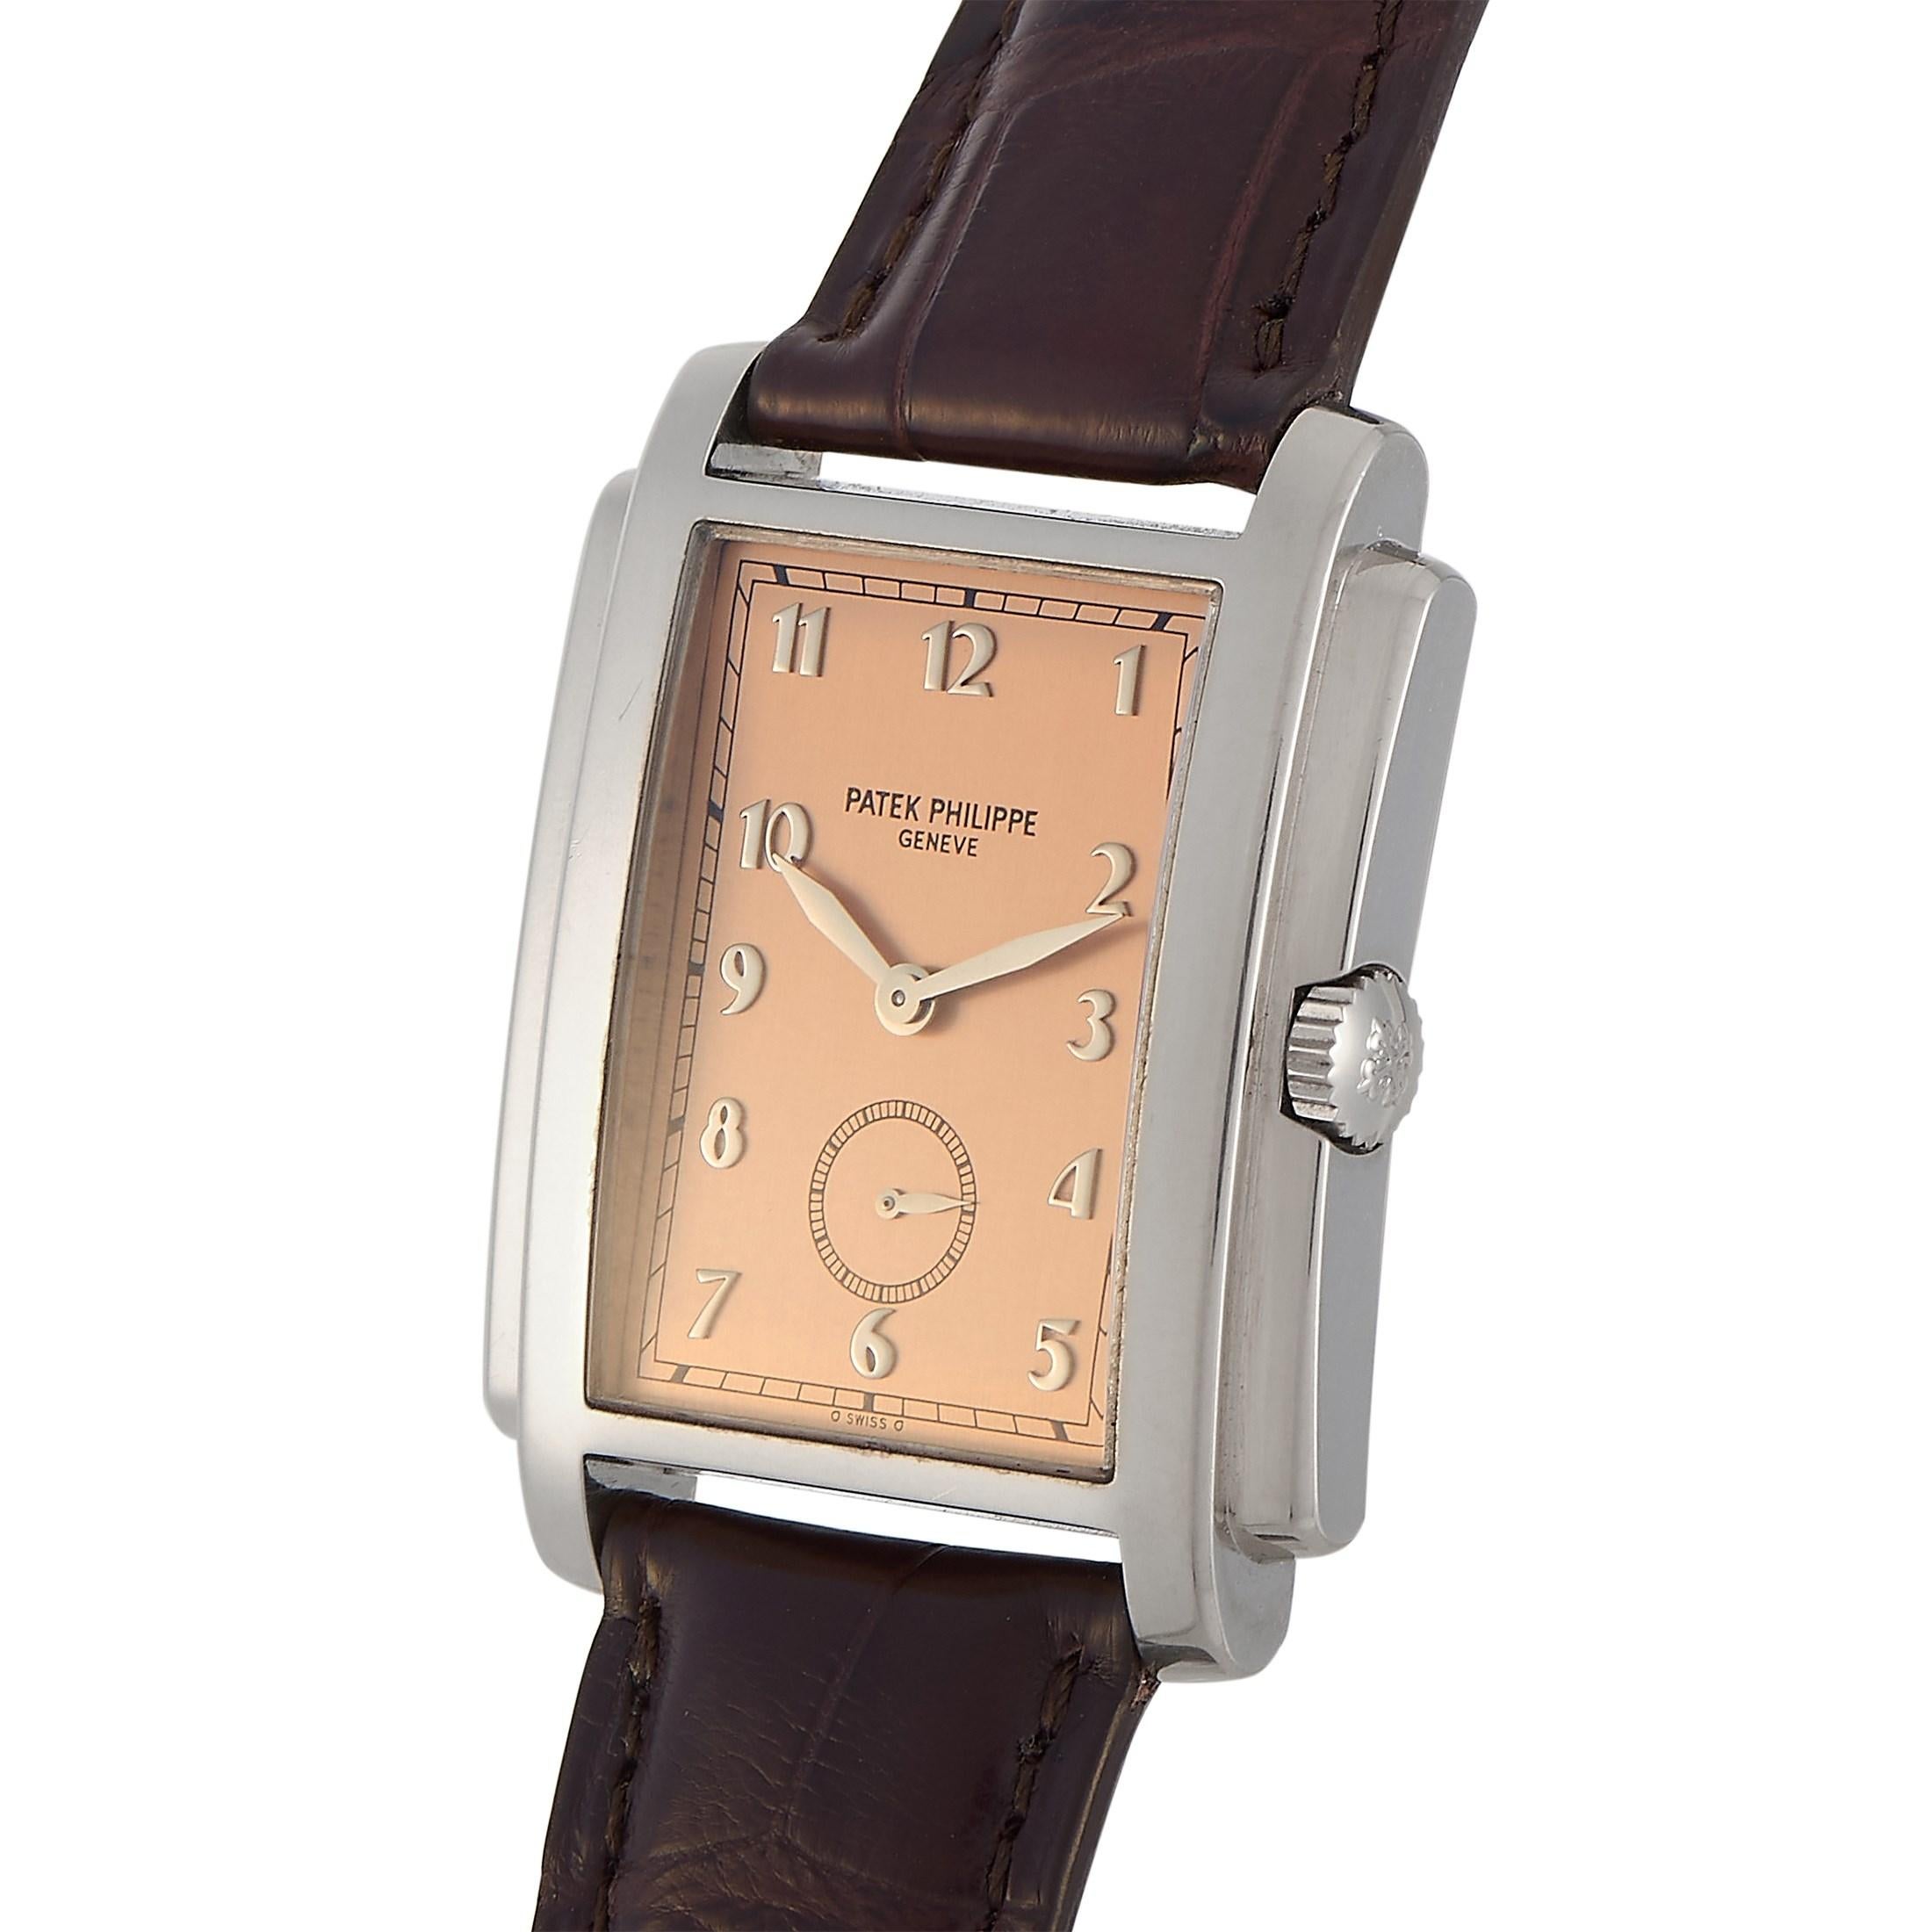 The elegant Gondolo 5024G-001 watch from Patek Philippe displays an 18K white gold rectangular Art Deco-inspired case with stepped sides. It is paired with a salmon pink dial with white gold hands and Roman Numeral hour markers. An alligator leather